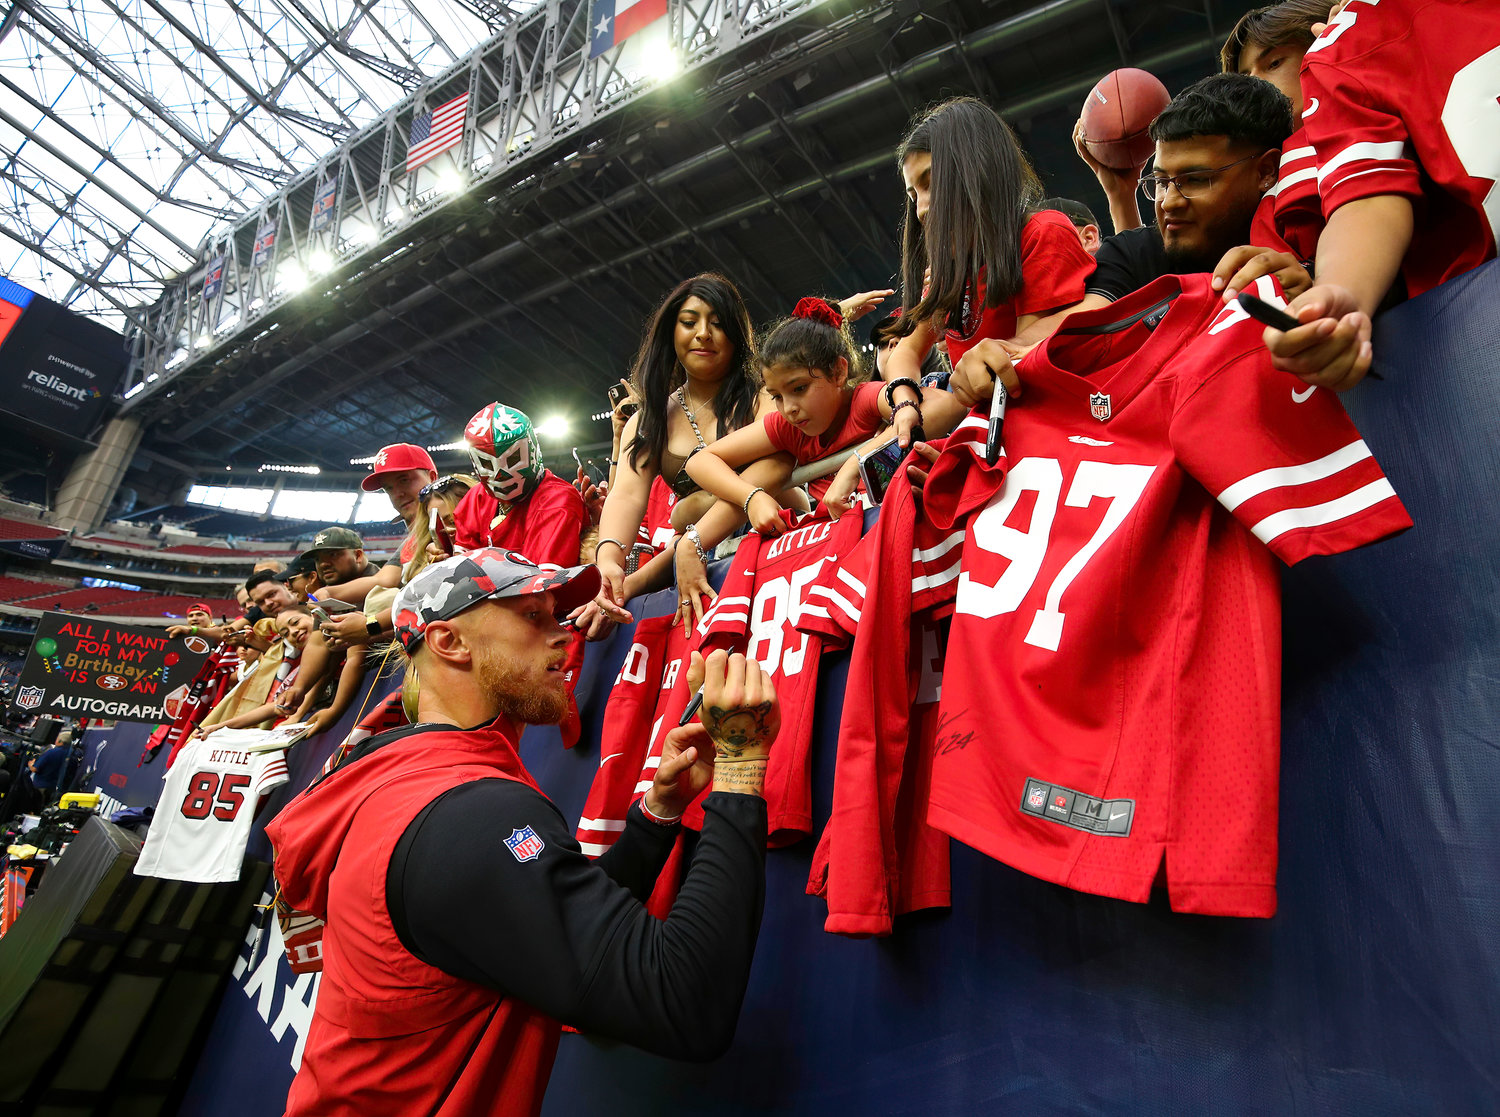 San Francisco 49ers tight end George Kittle (85) signs autographs before the start of an NFL preseason game between the Texans and the 49ers in Houston, Texas, on August 25, 2022.